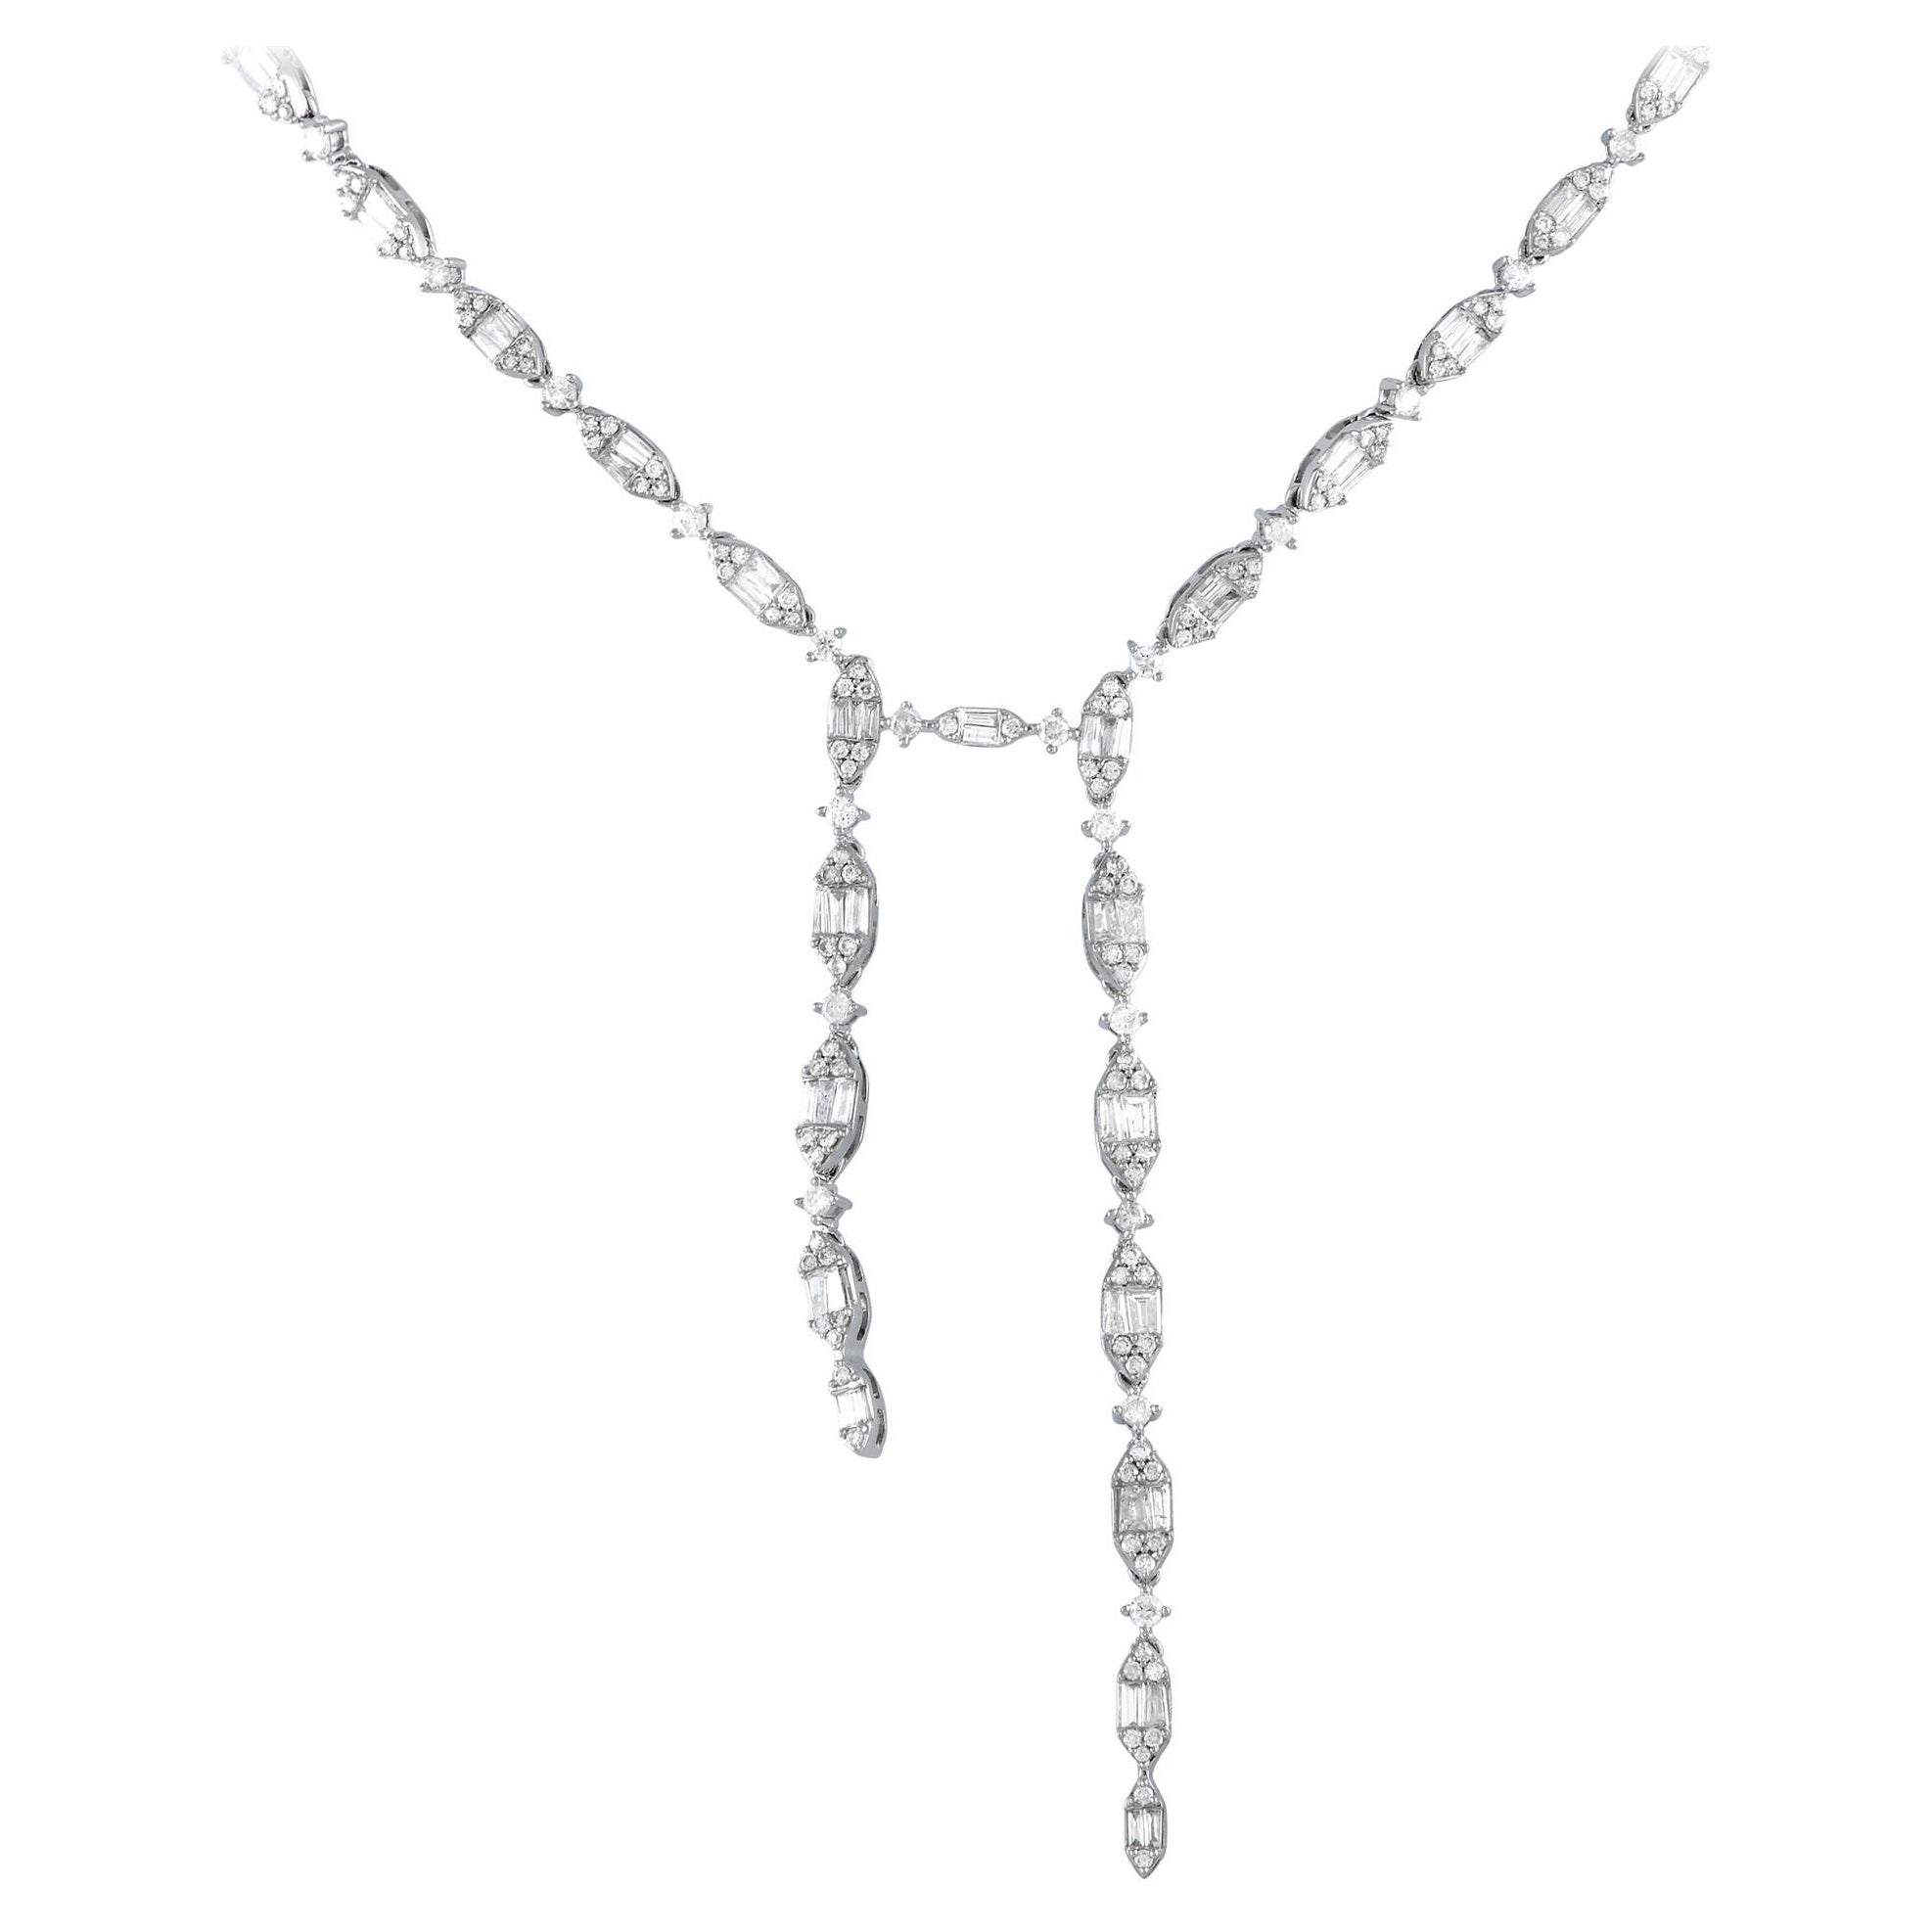 LB Exclusive 14K White Gold 4.80ct Diamond Necklace NK01376 For Sale